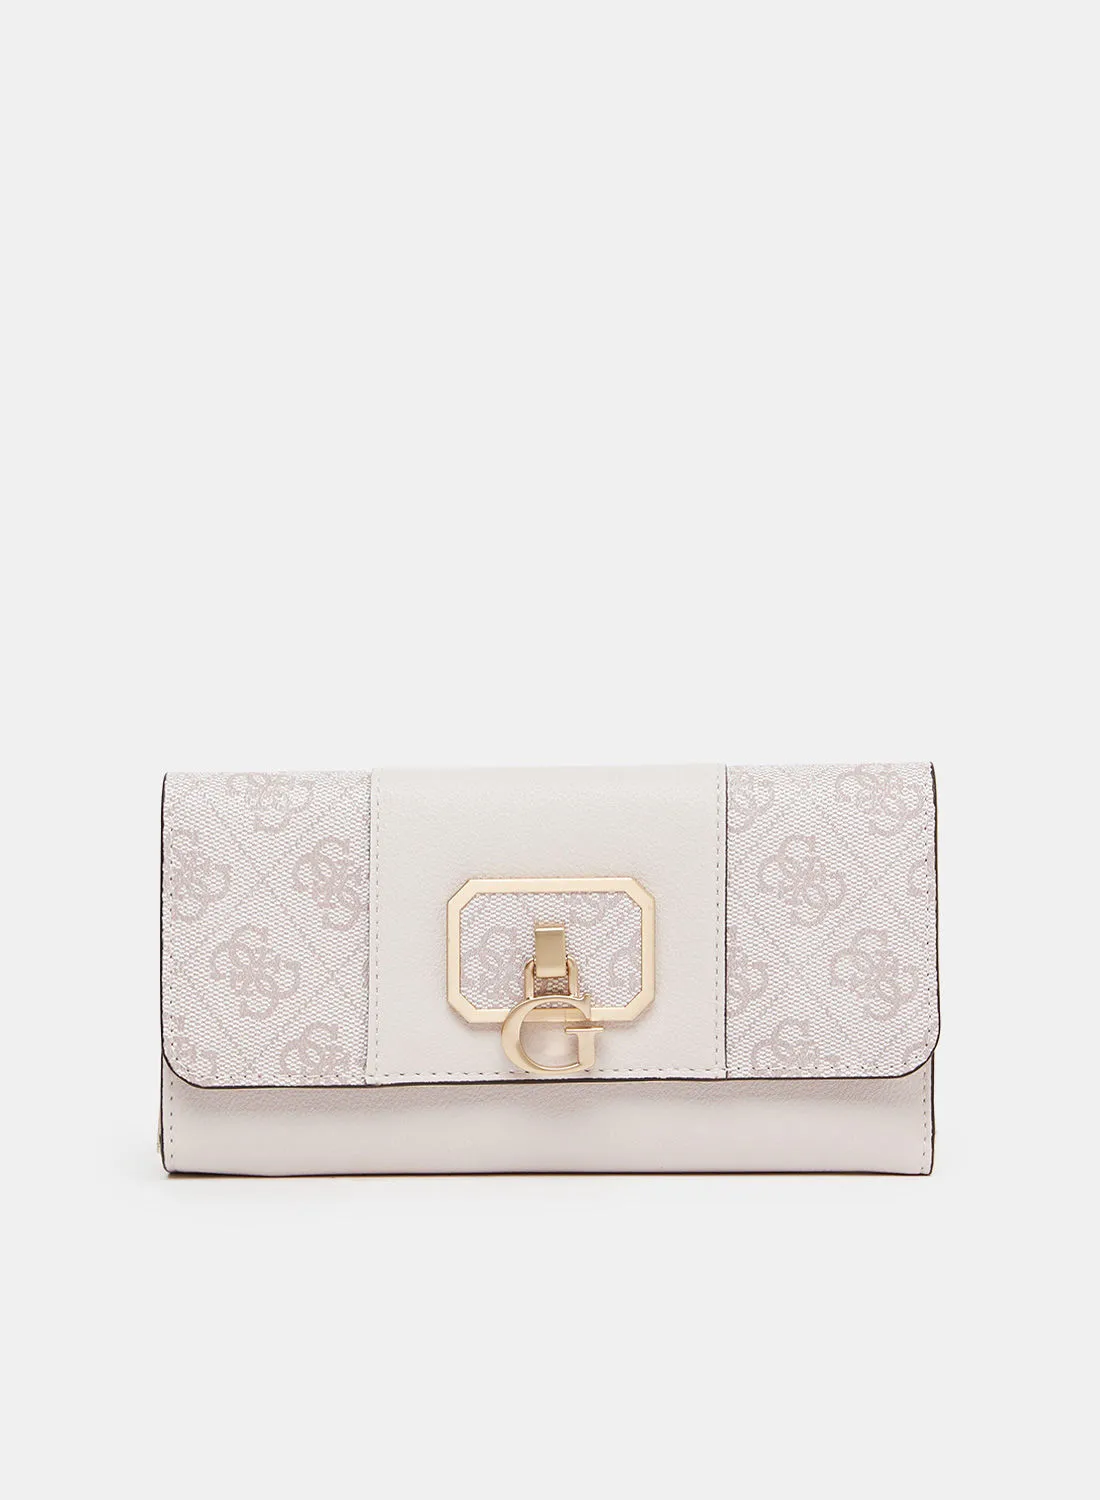 GUESS Noelle Flapover Wallet أرجواني فاتح